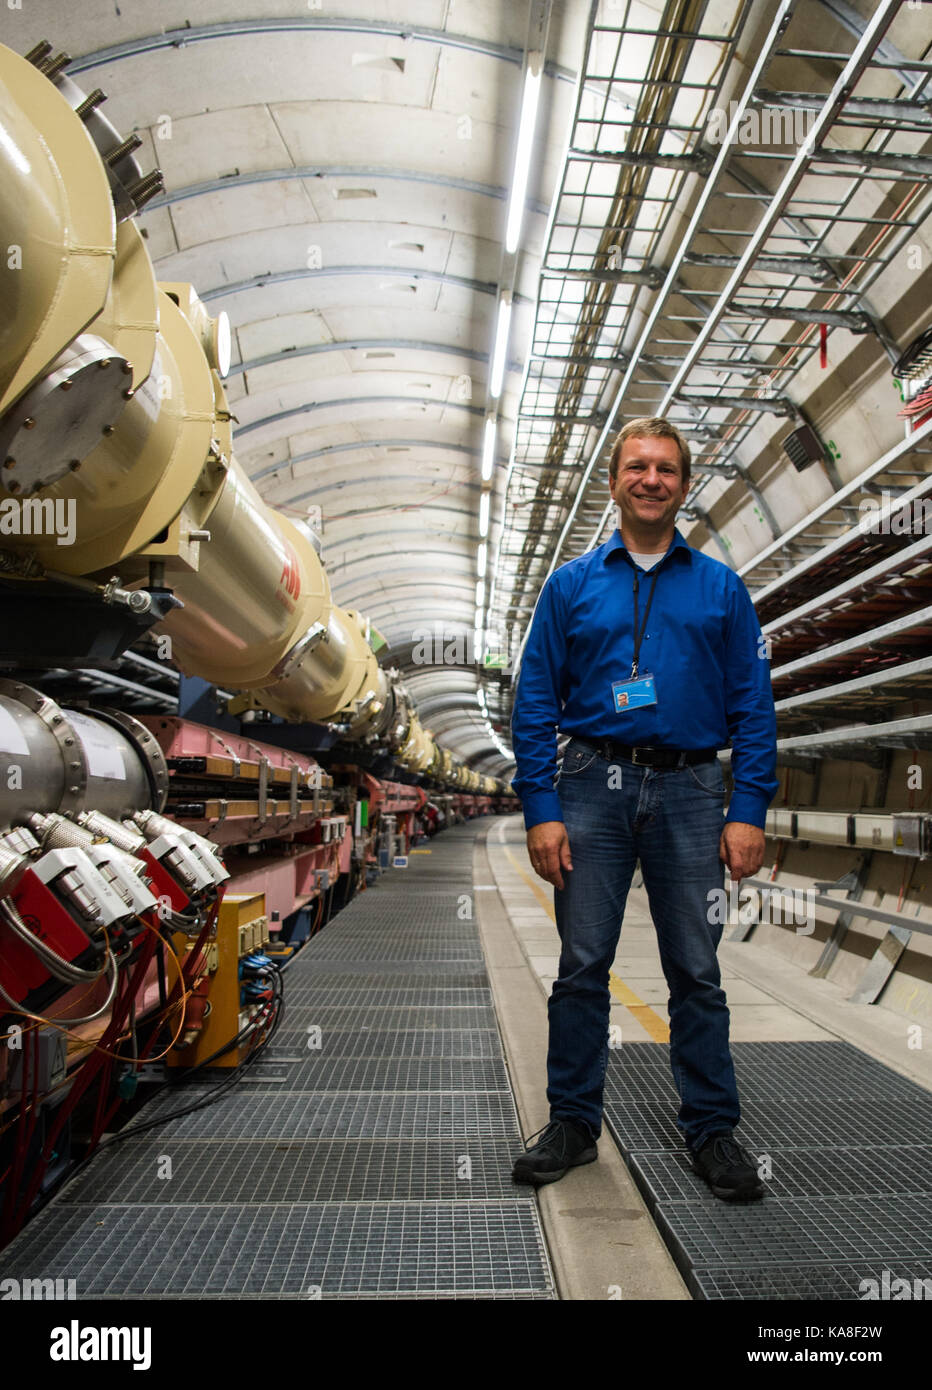 Hamburg, Germany. 13th Sep, 2017. Thomas Zoufal, a spokesperson of the Deutschen Elektronen-Synchrotron (Desy) (lit. German Electron Synchrotron), stands in a tunnel of the Hadron-Elektron-Ring-Anlage (Hera) (lit. Hadron-Electron-Ring-Plant) at the Desy grounds in Hamburg, Germany, 13 September 2017. Researches of Desy want to prove the existence of darf matter. The experiment will be set up in the Hadron-Elektron-Ring-Anlage (Hera) which has not been used for a long time. Credit: Christophe Gateau/dpa/Alamy Live News Stock Photo